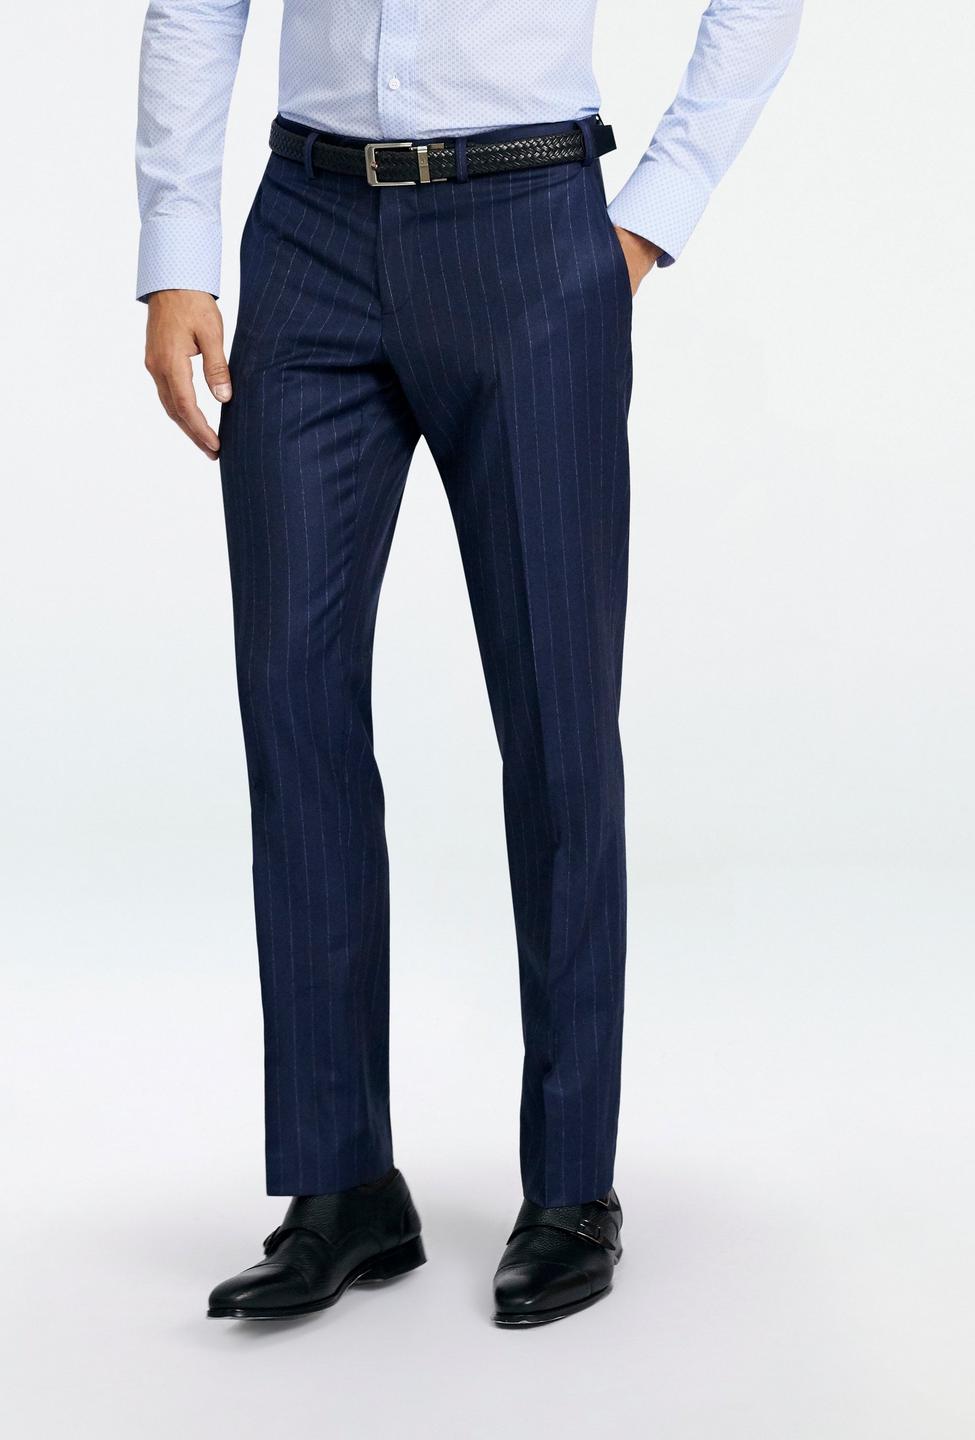 Blue pants - Reigate Striped Design from Seasonal Indochino Collection